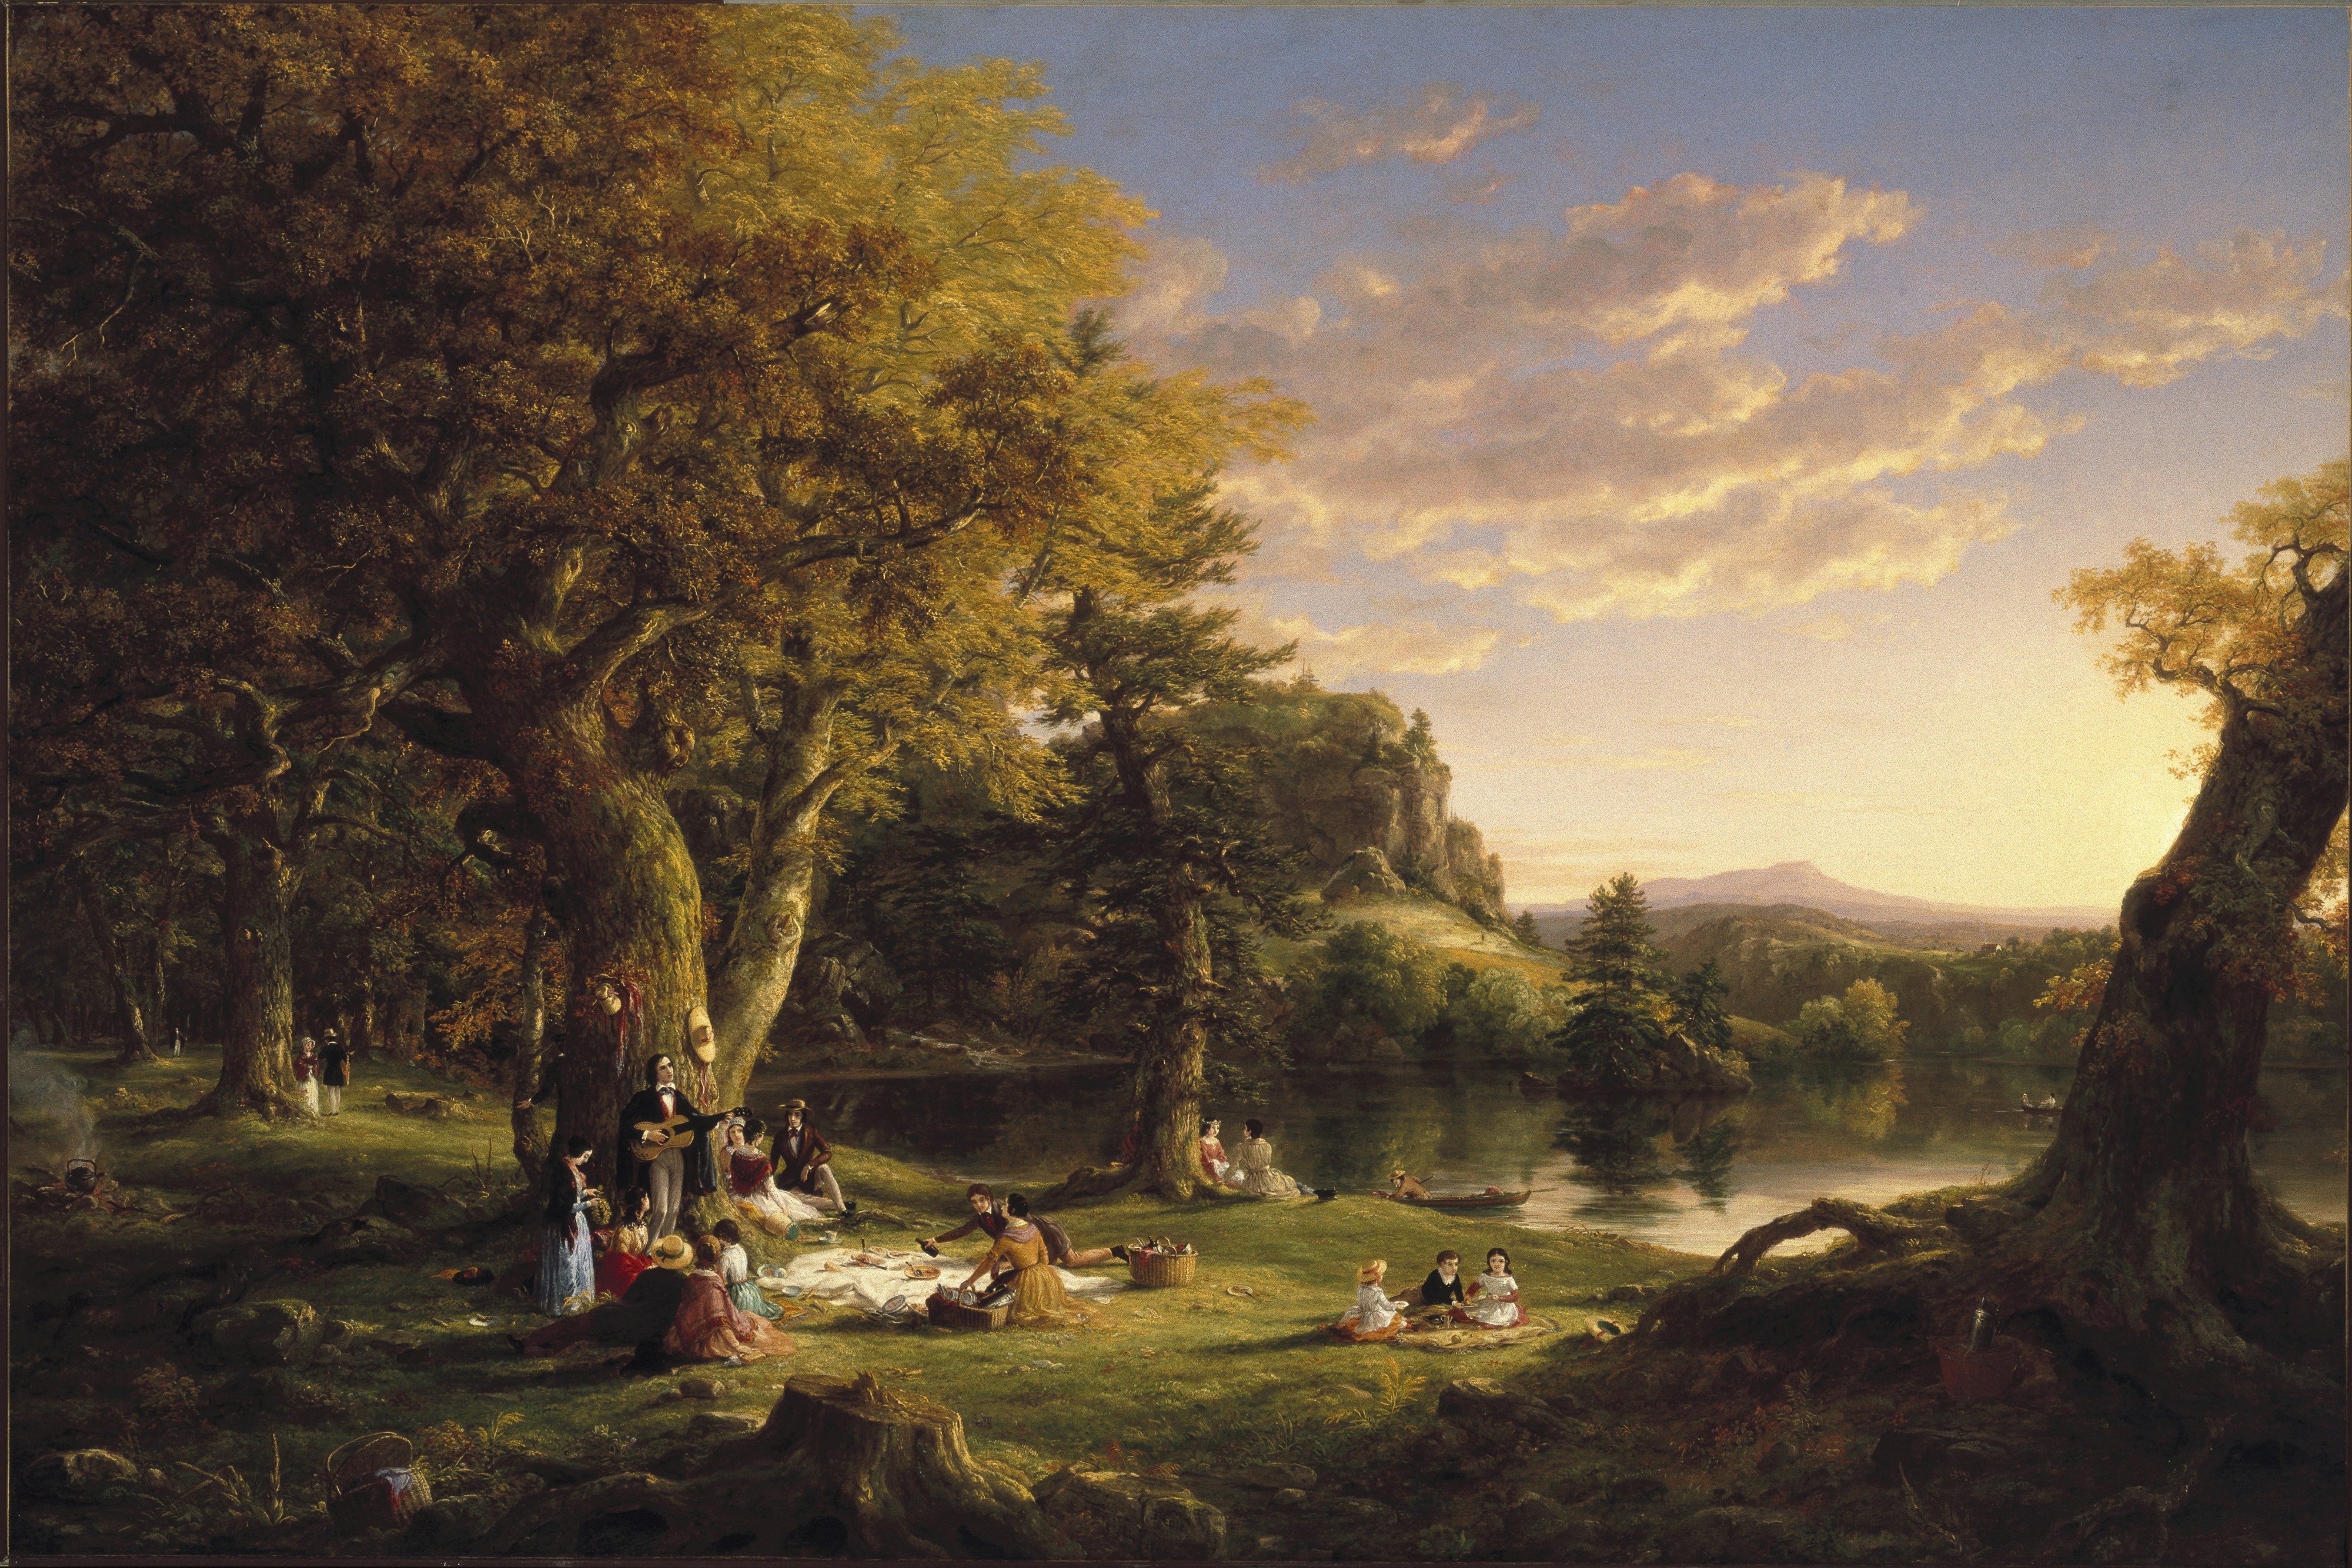 Thomas Cole - The Pic-Nic (1846) - Google Art Project